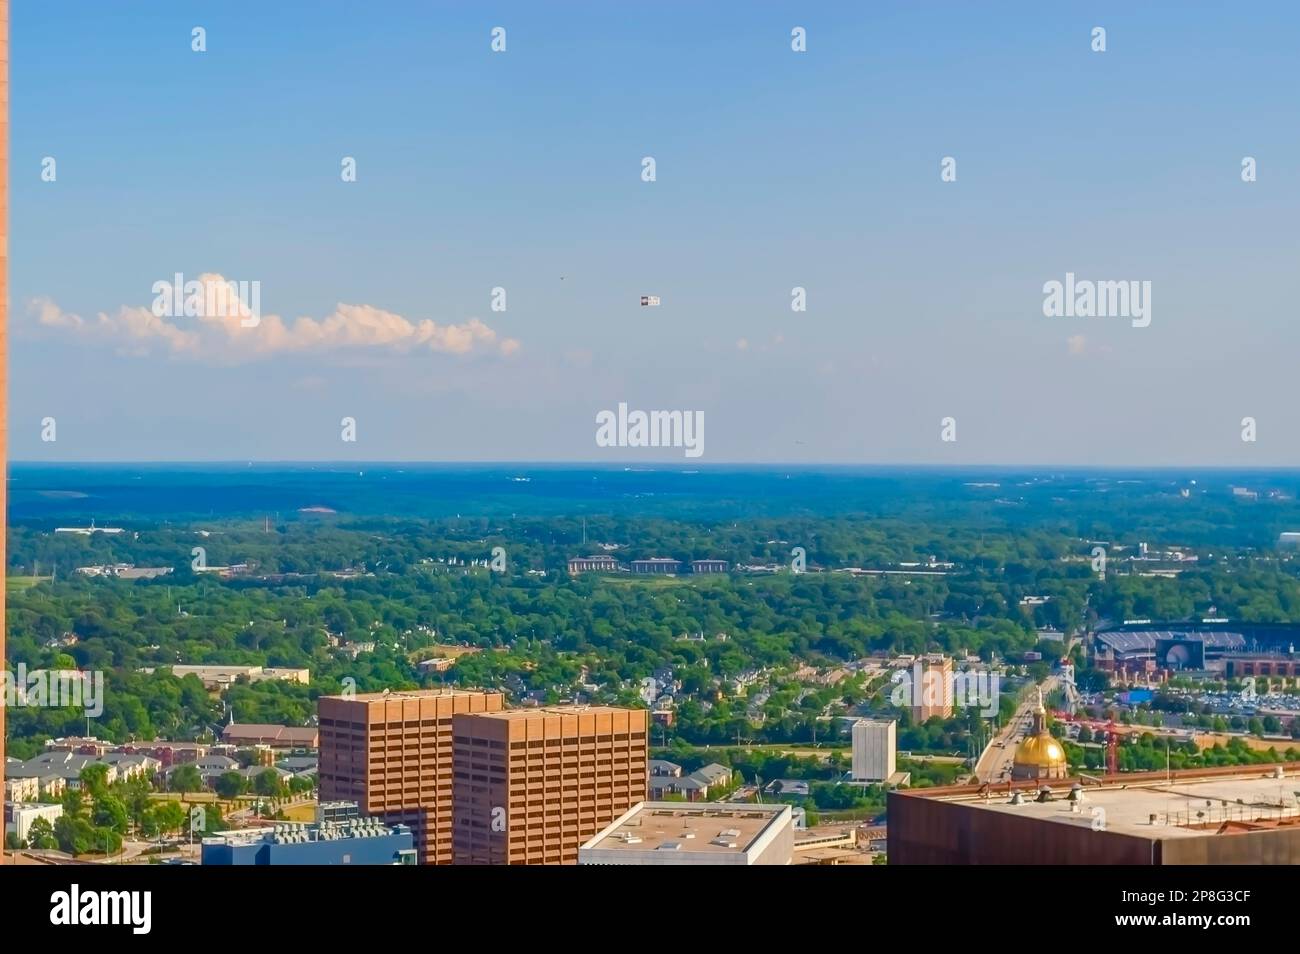 Atlanta landscape and the top sections of Twin Towers State Buildings located in downtown Atlanta, GA, as seen from the Westin Peachtree Plaza Hotel. Stock Photo